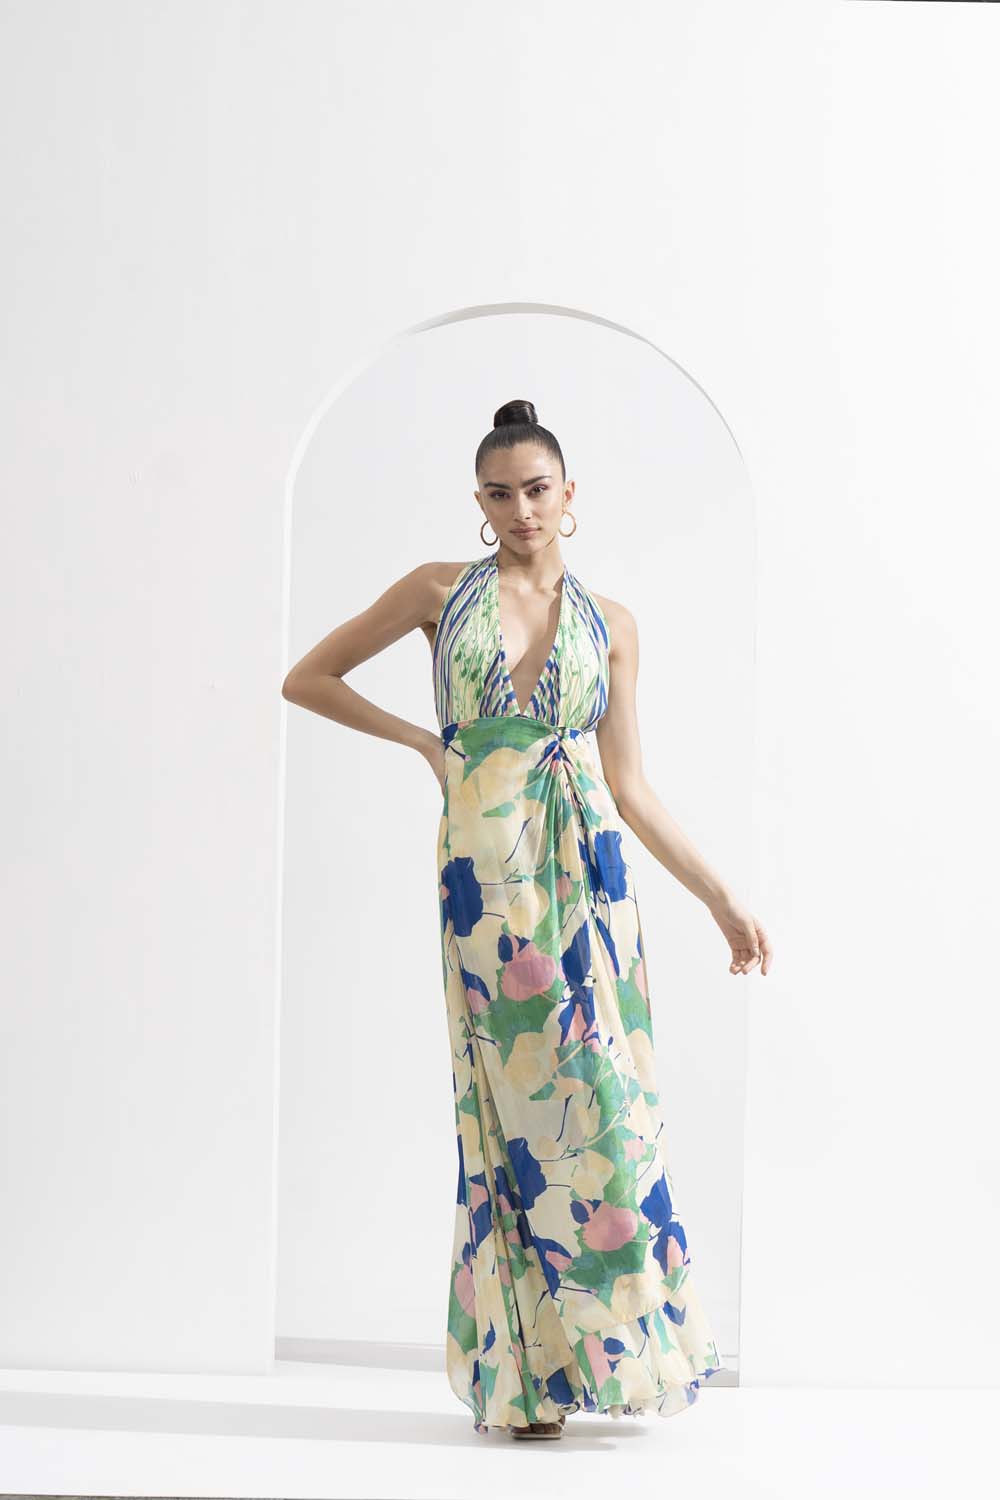 Mystic green chiffon placement printed draped halter neck dress with a silver accessory.